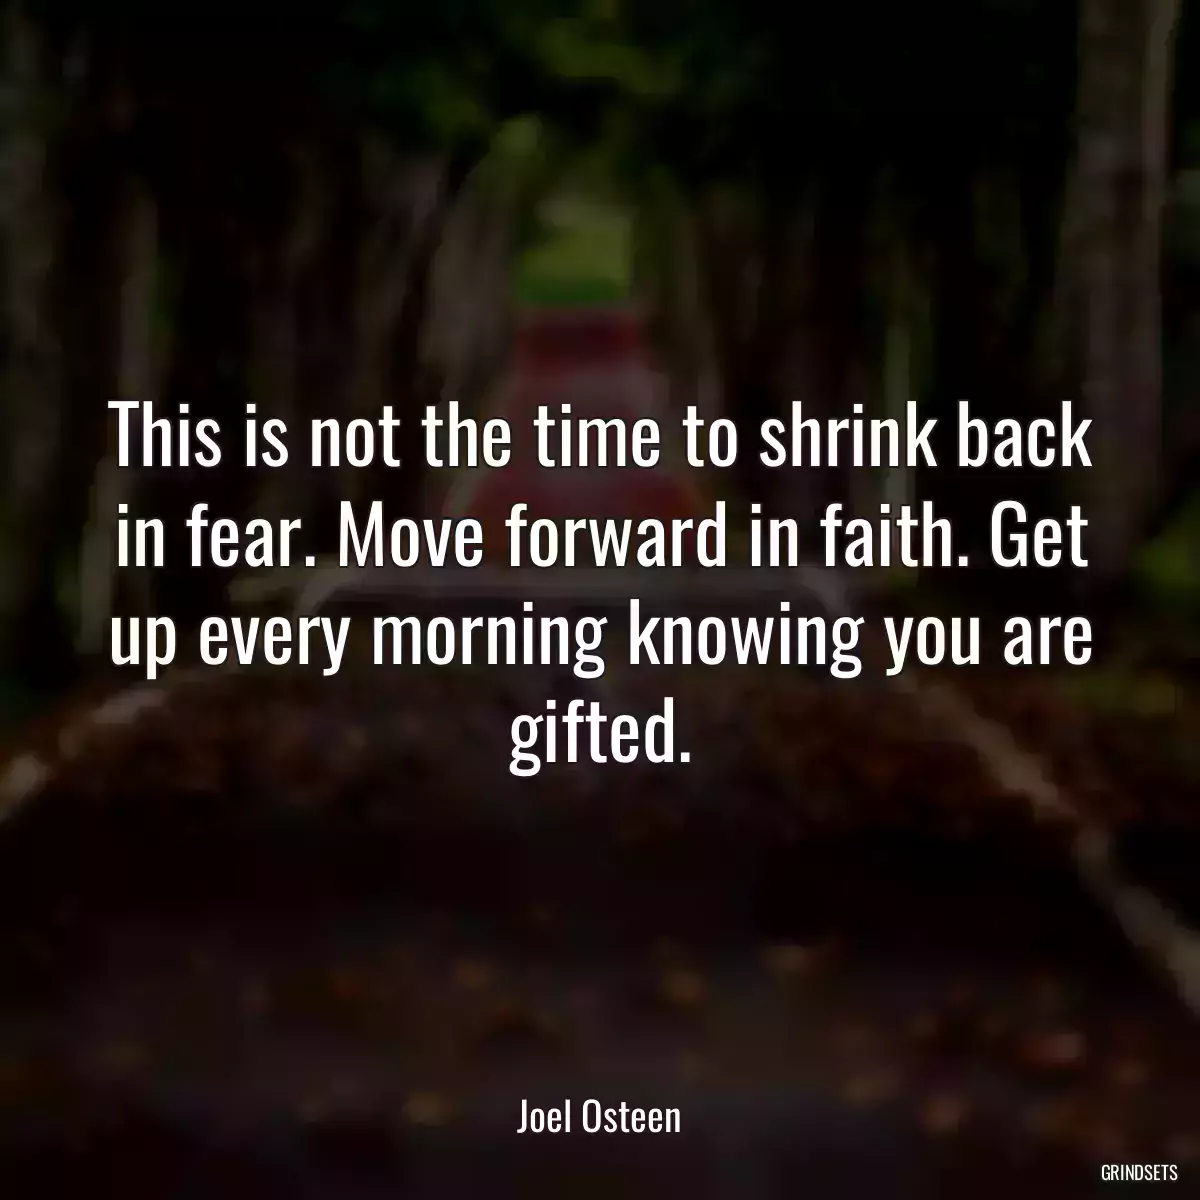 This is not the time to shrink back in fear. Move forward in faith. Get up every morning knowing you are gifted.